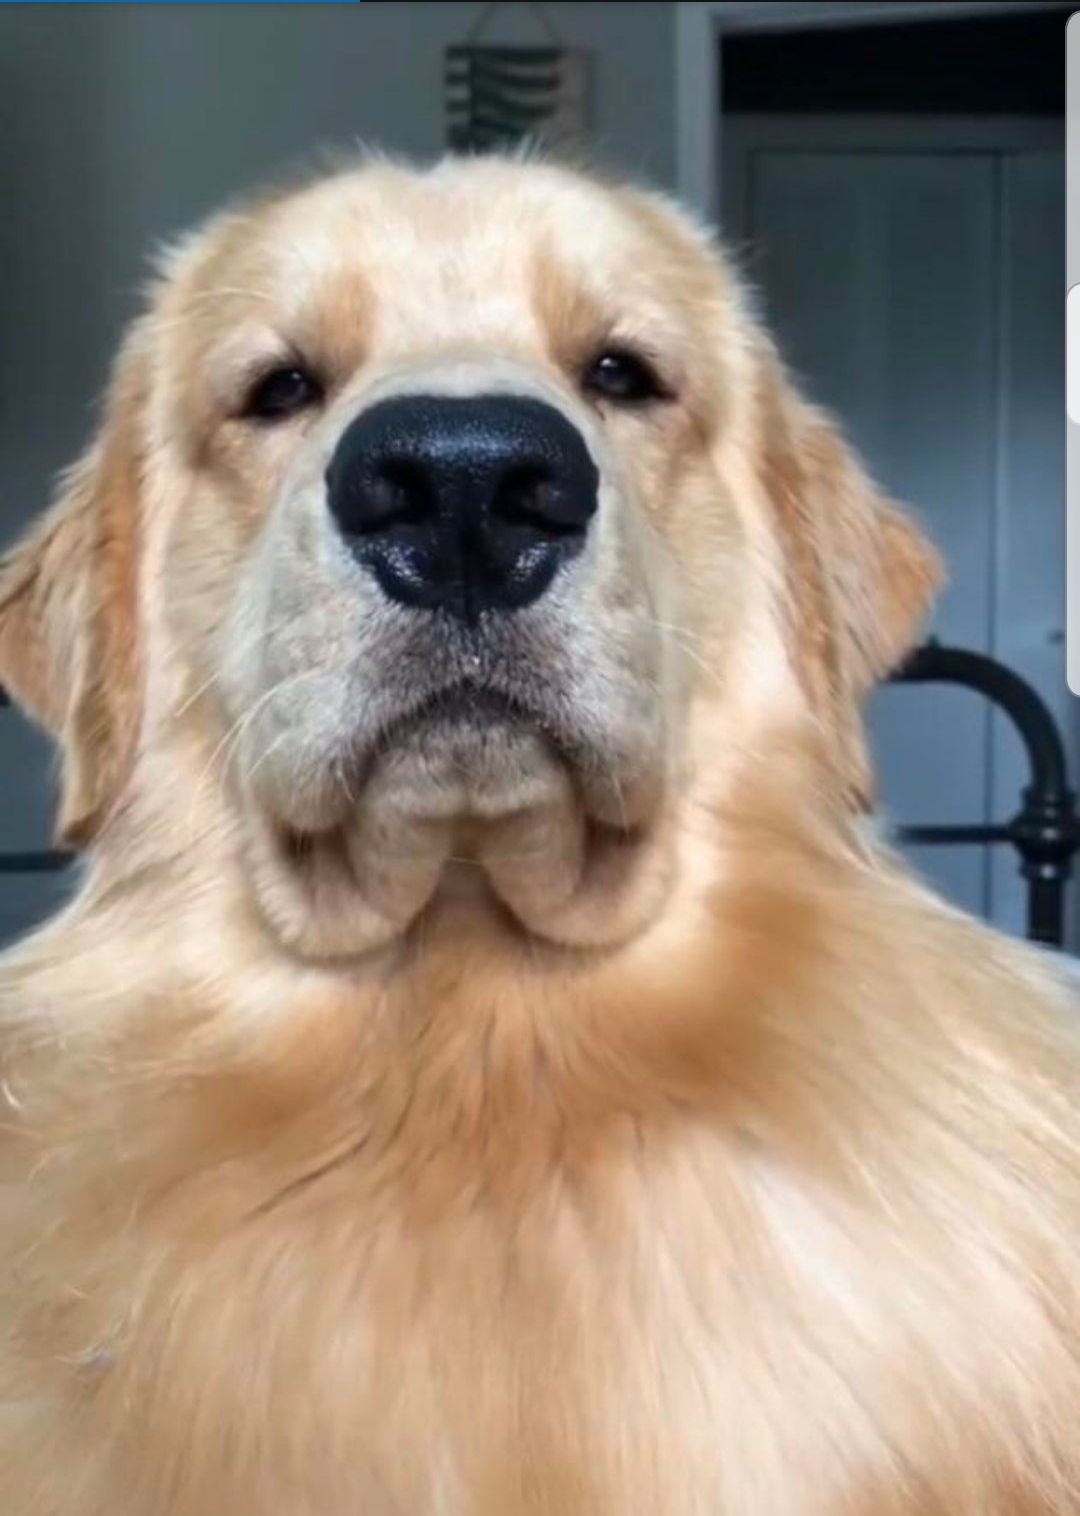 I showed you my boops... please respond.